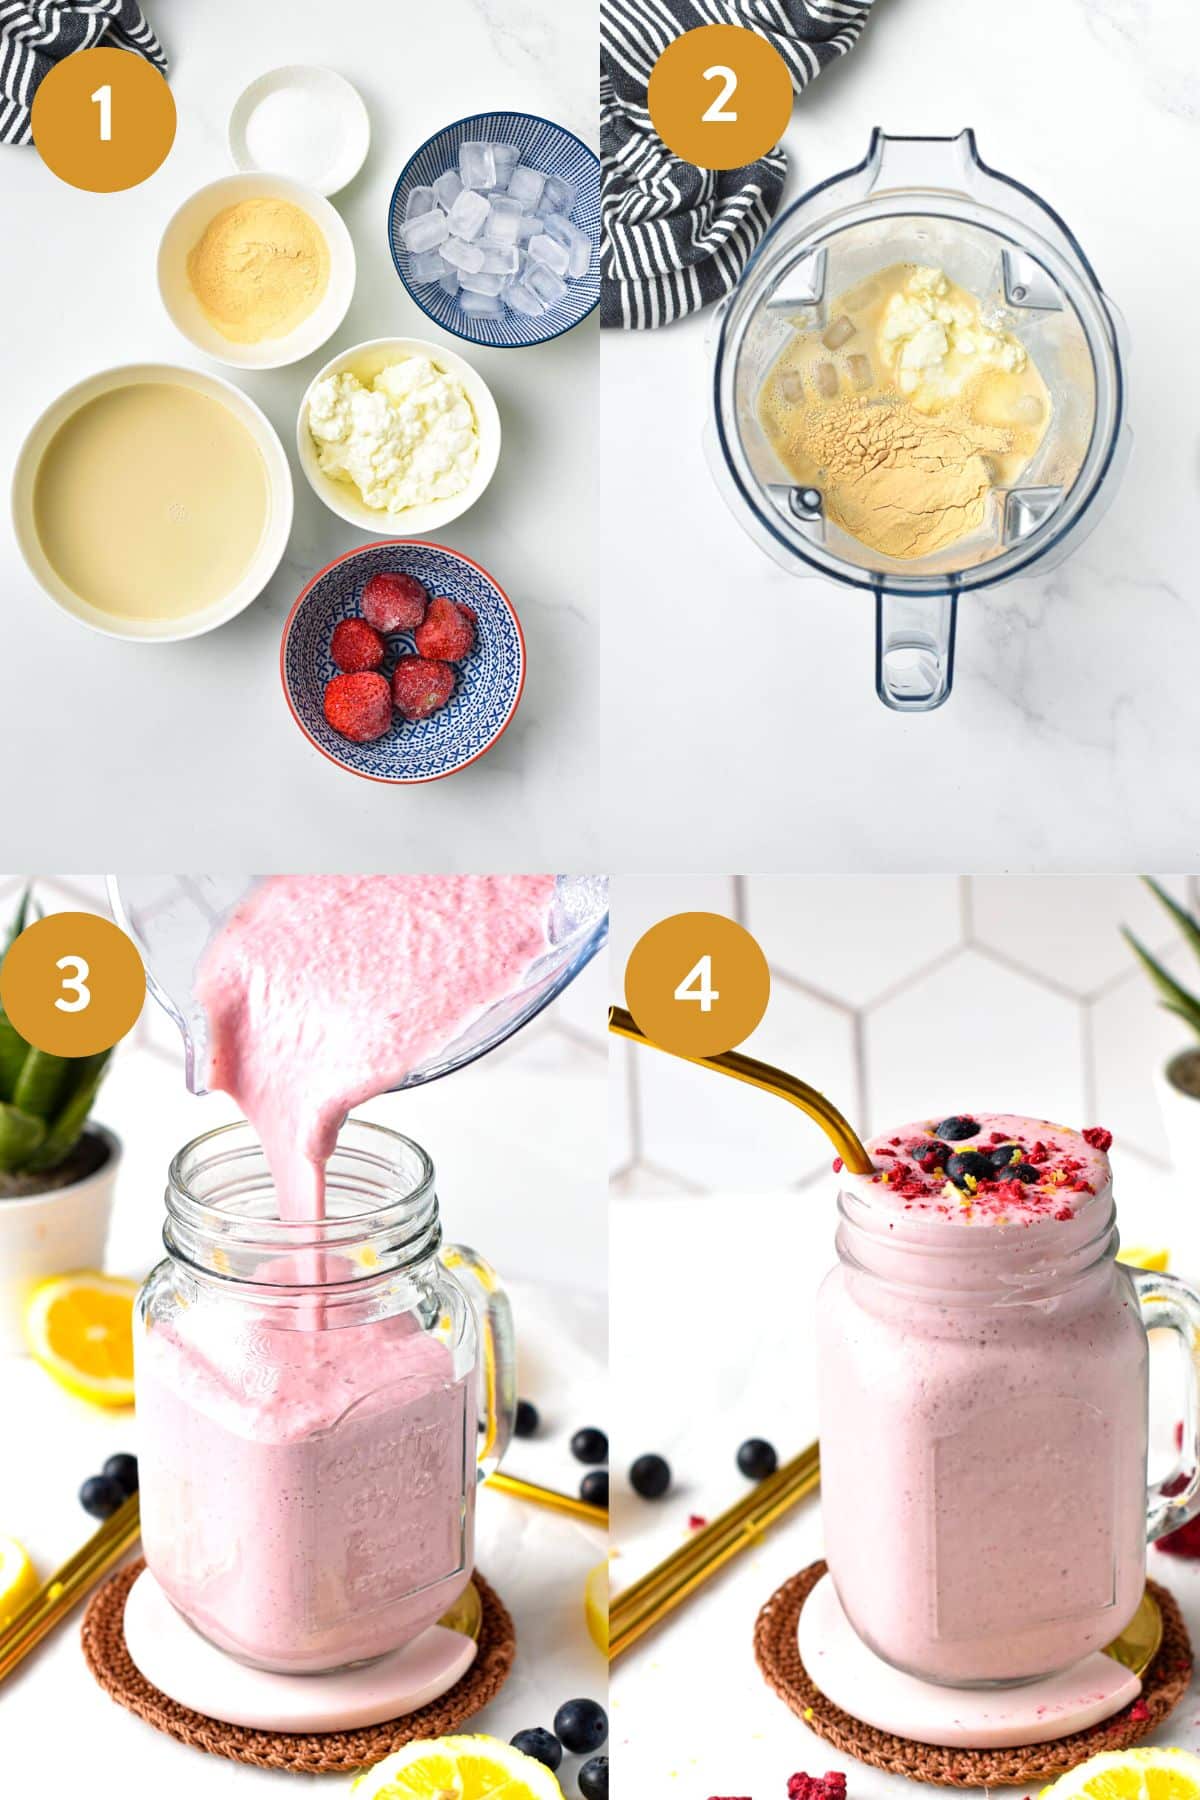 Step-by-step instructions on how to make a Cottage Cheese Protein Shake.